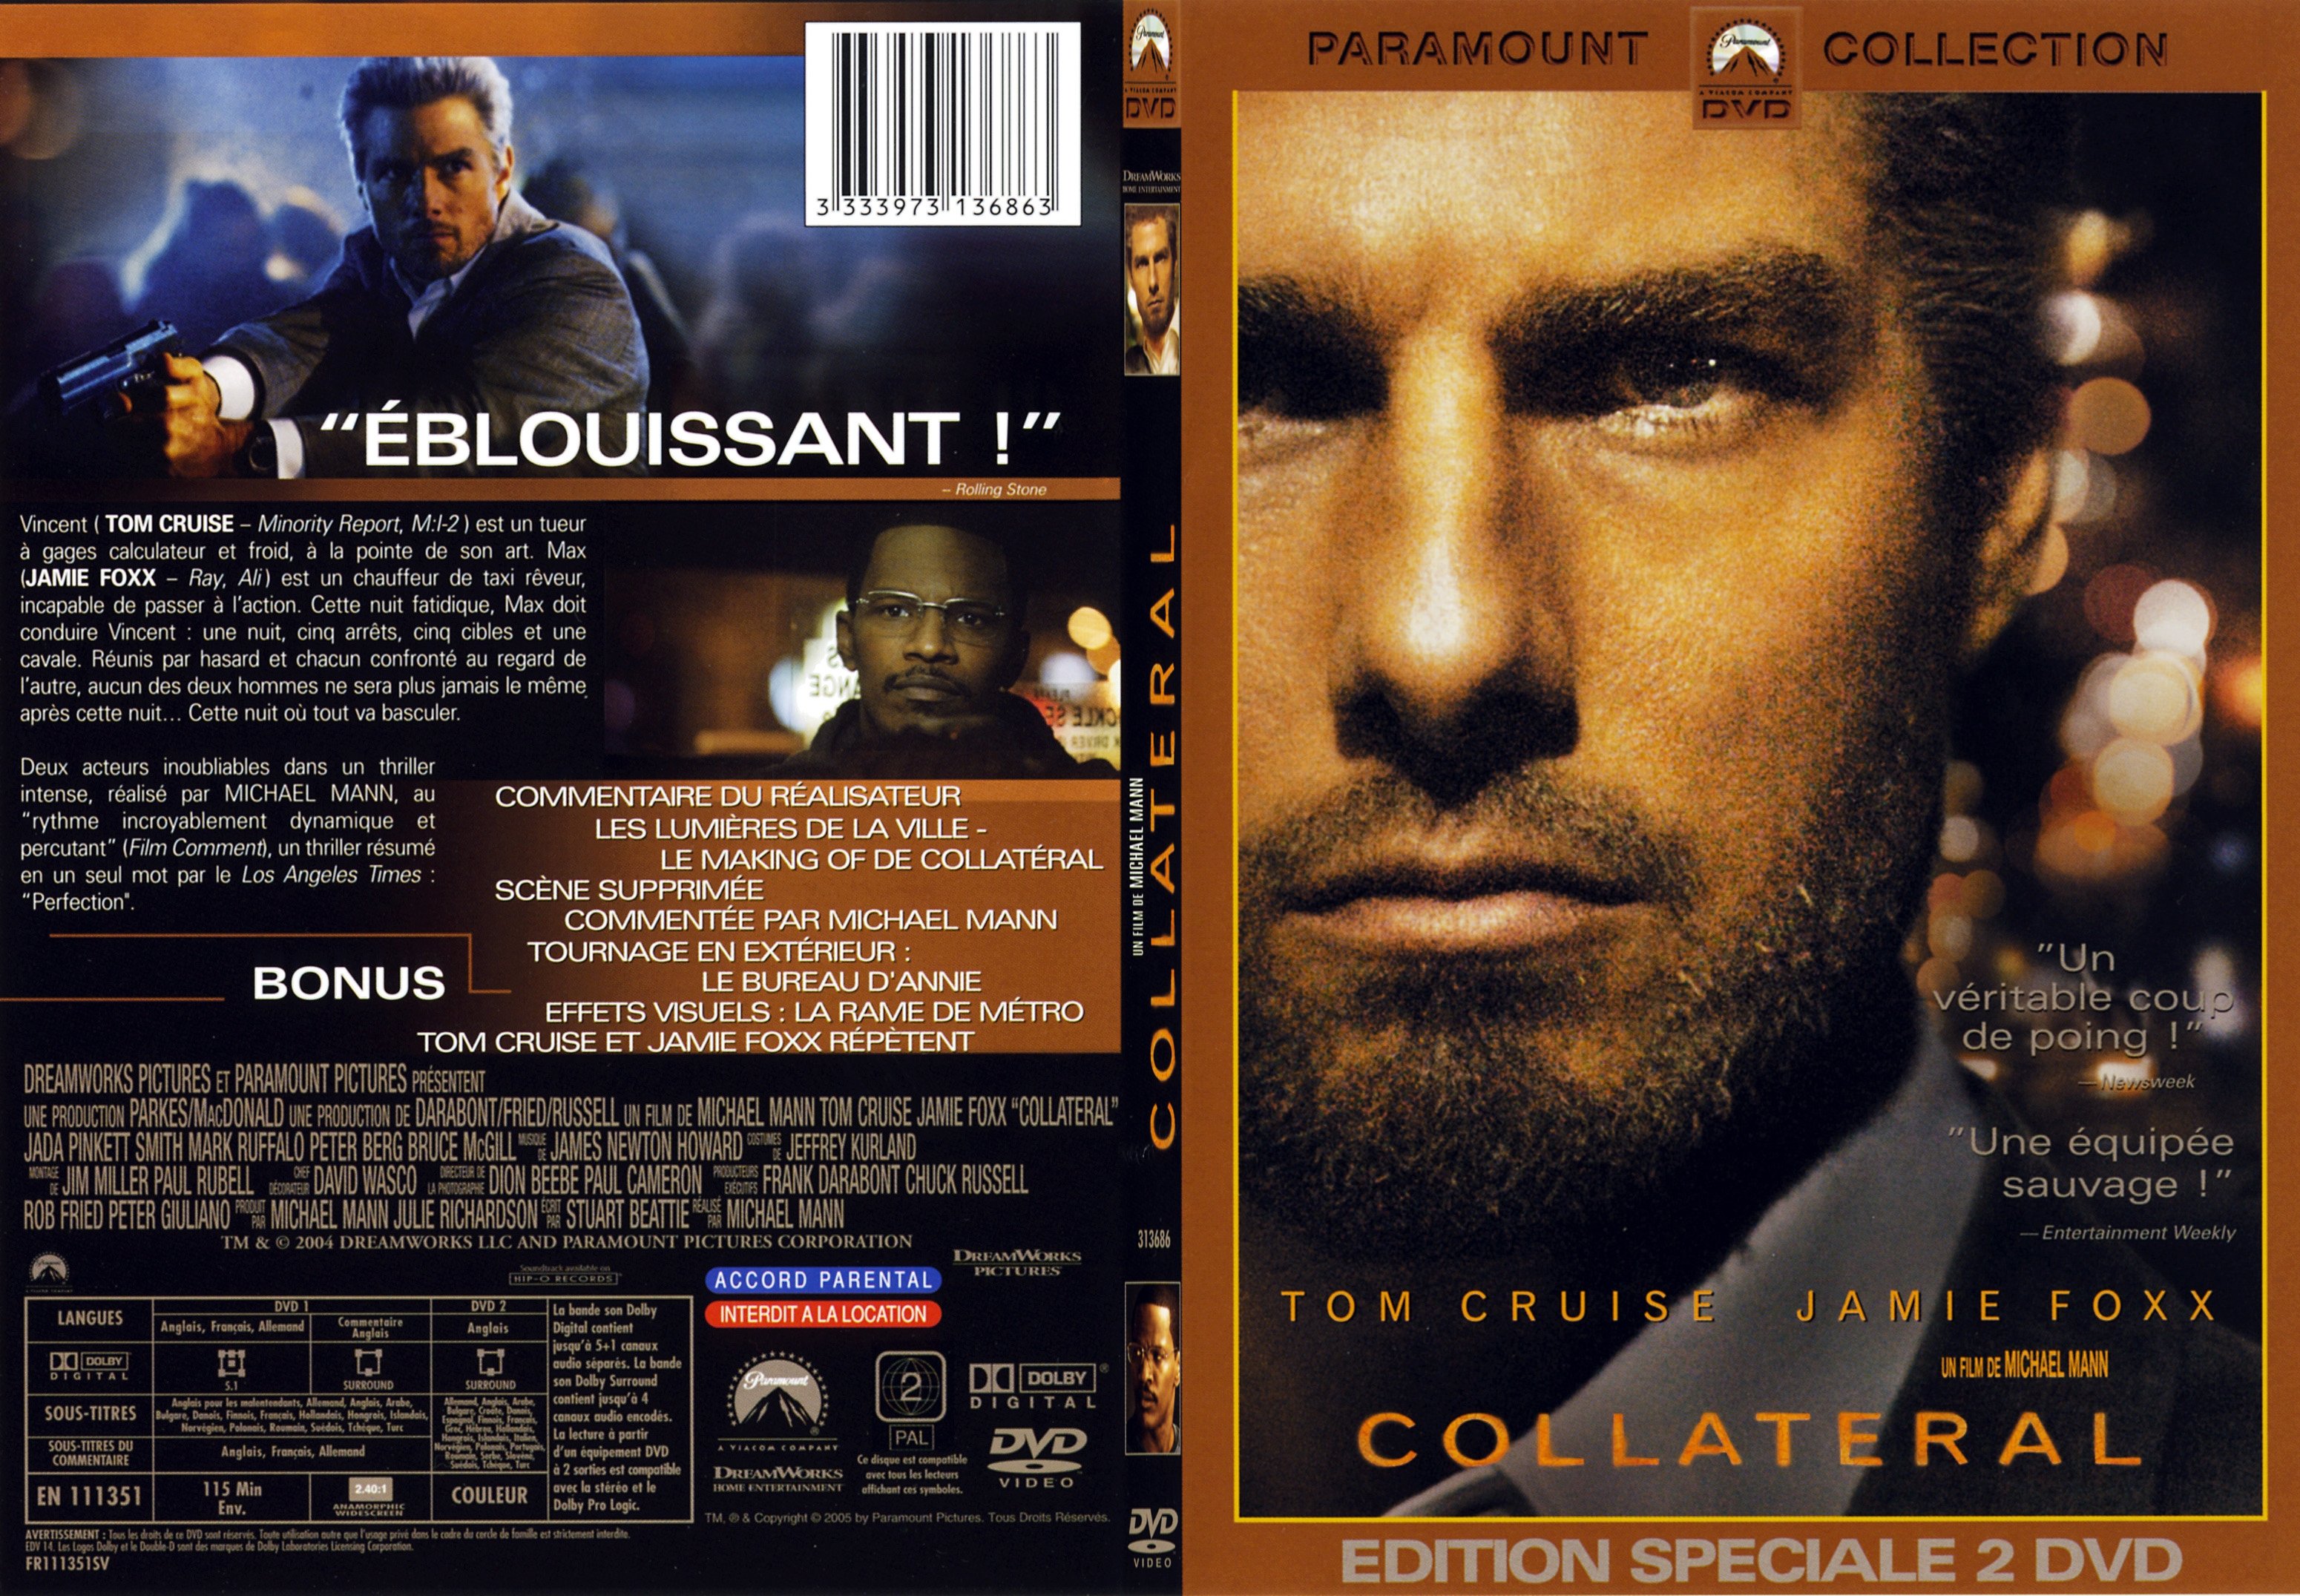 Jaquette DVD Collateral - SLIM